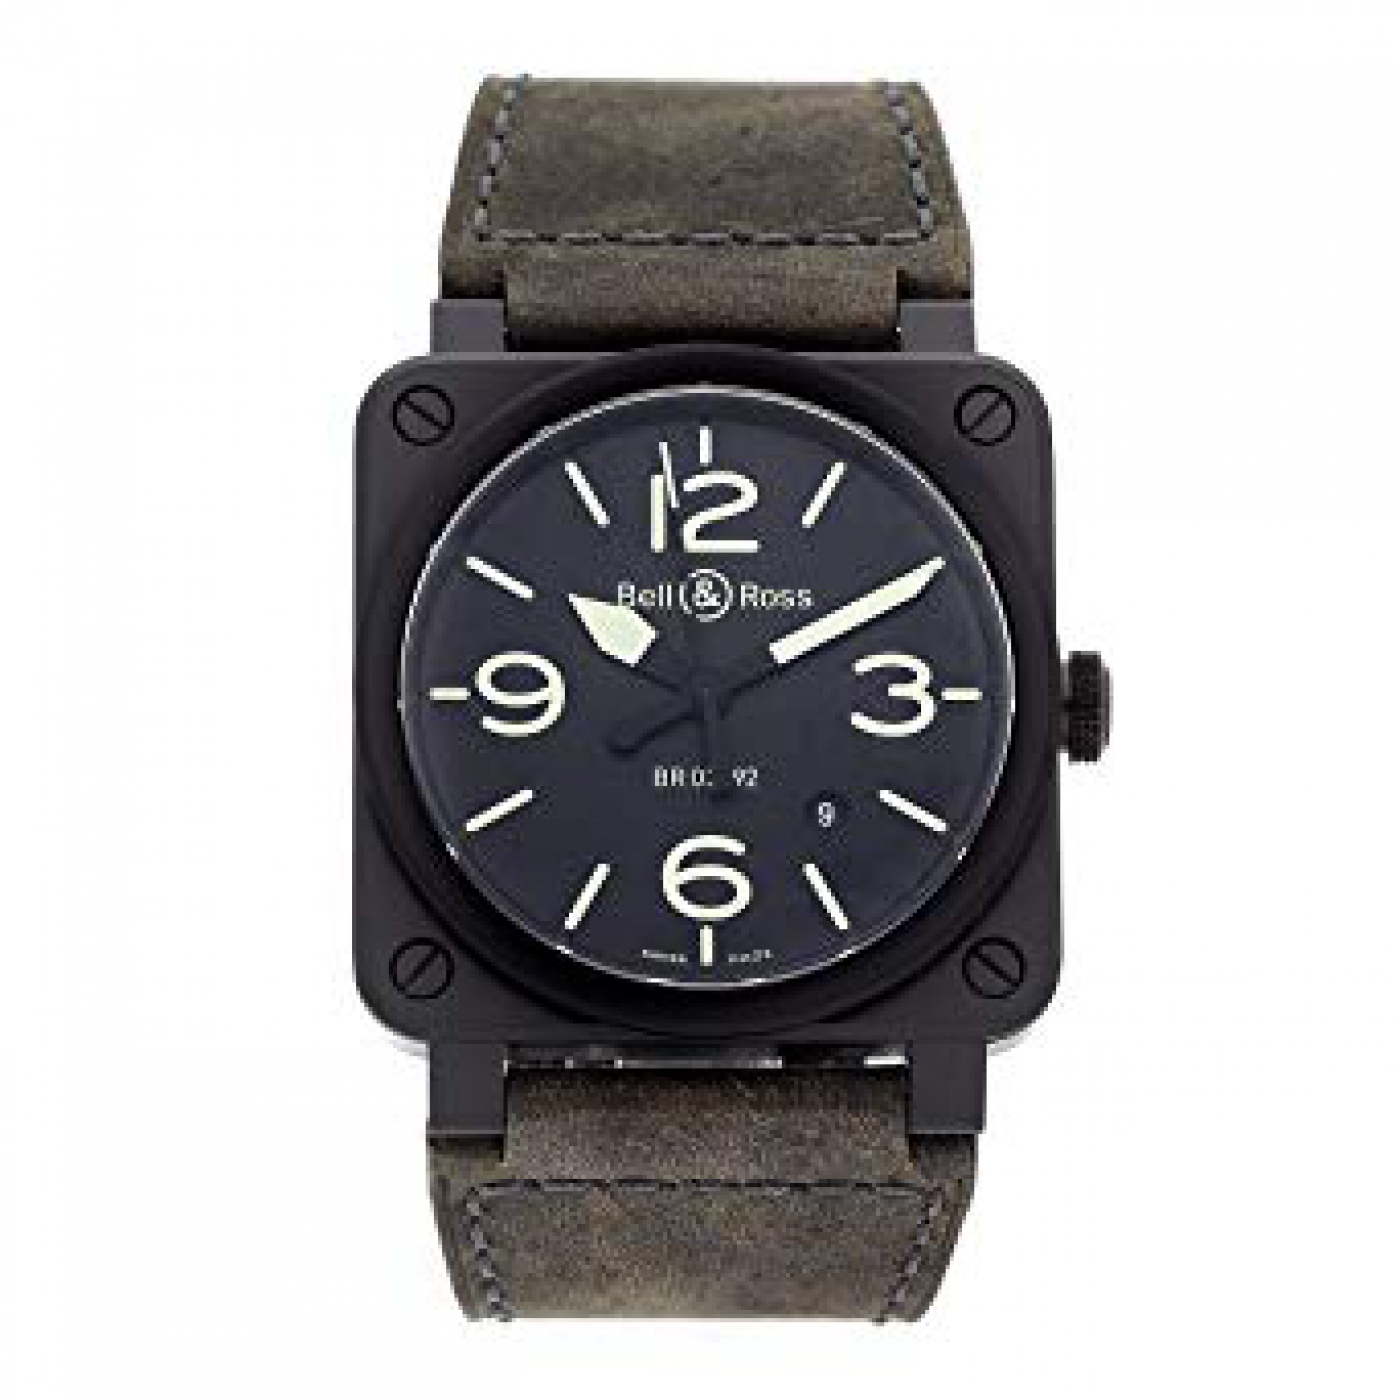 Bell & Ross BR0392-BL3-CE/SCA